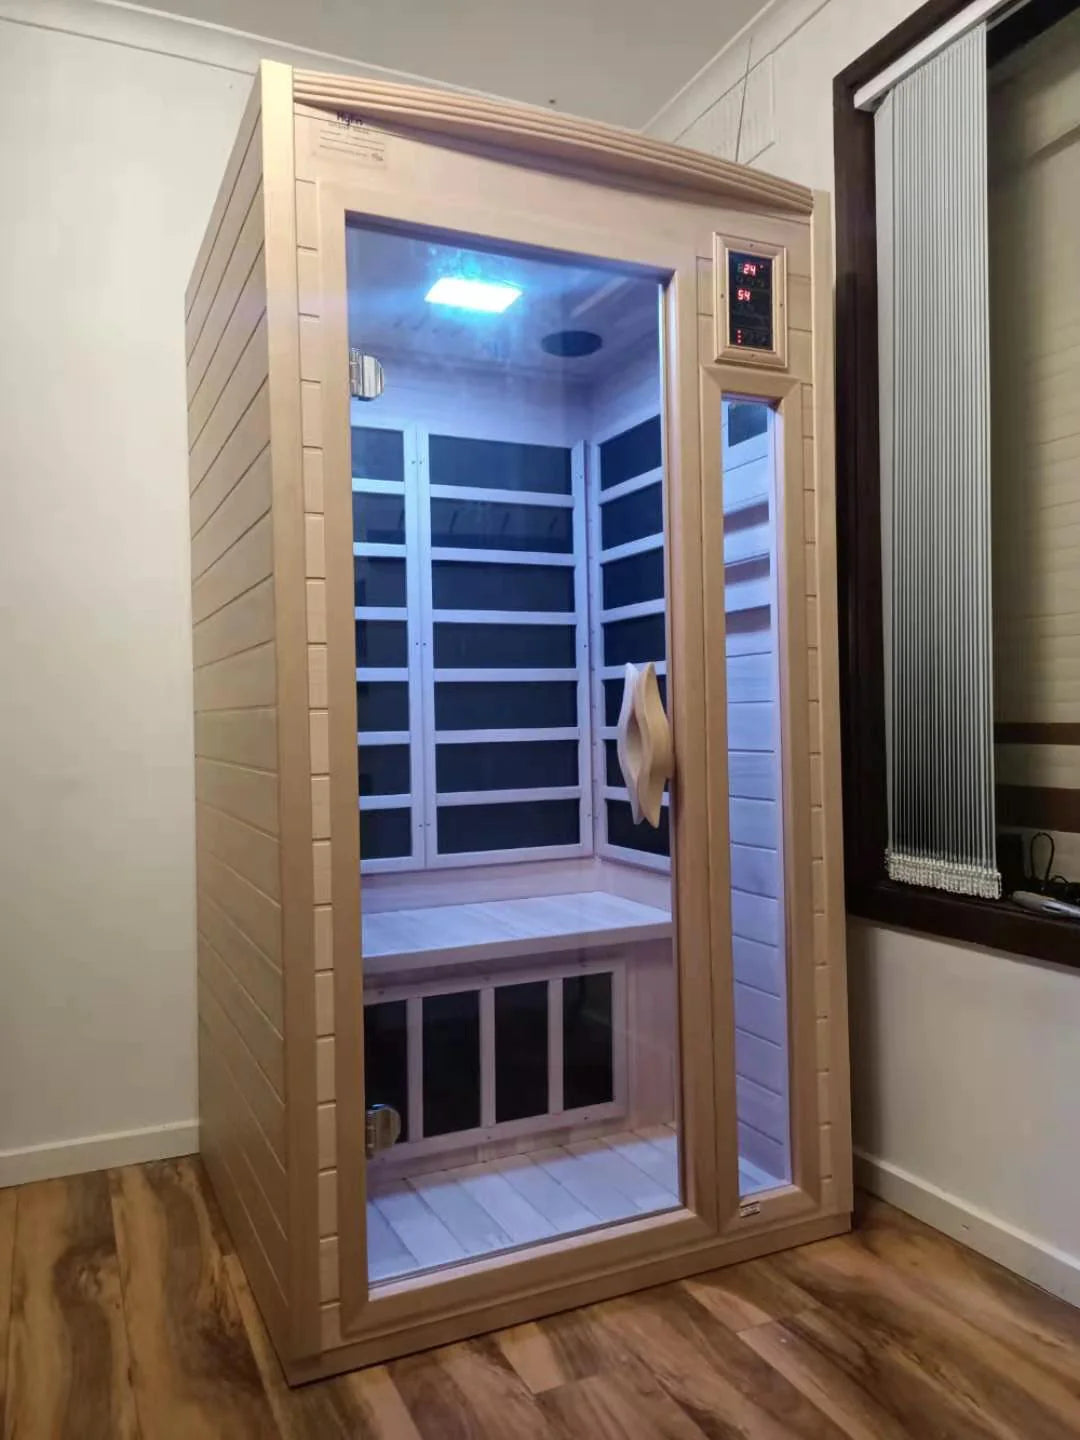 Kylin KY-023LB Low EMF Infrared Sauna 1 Person Compact